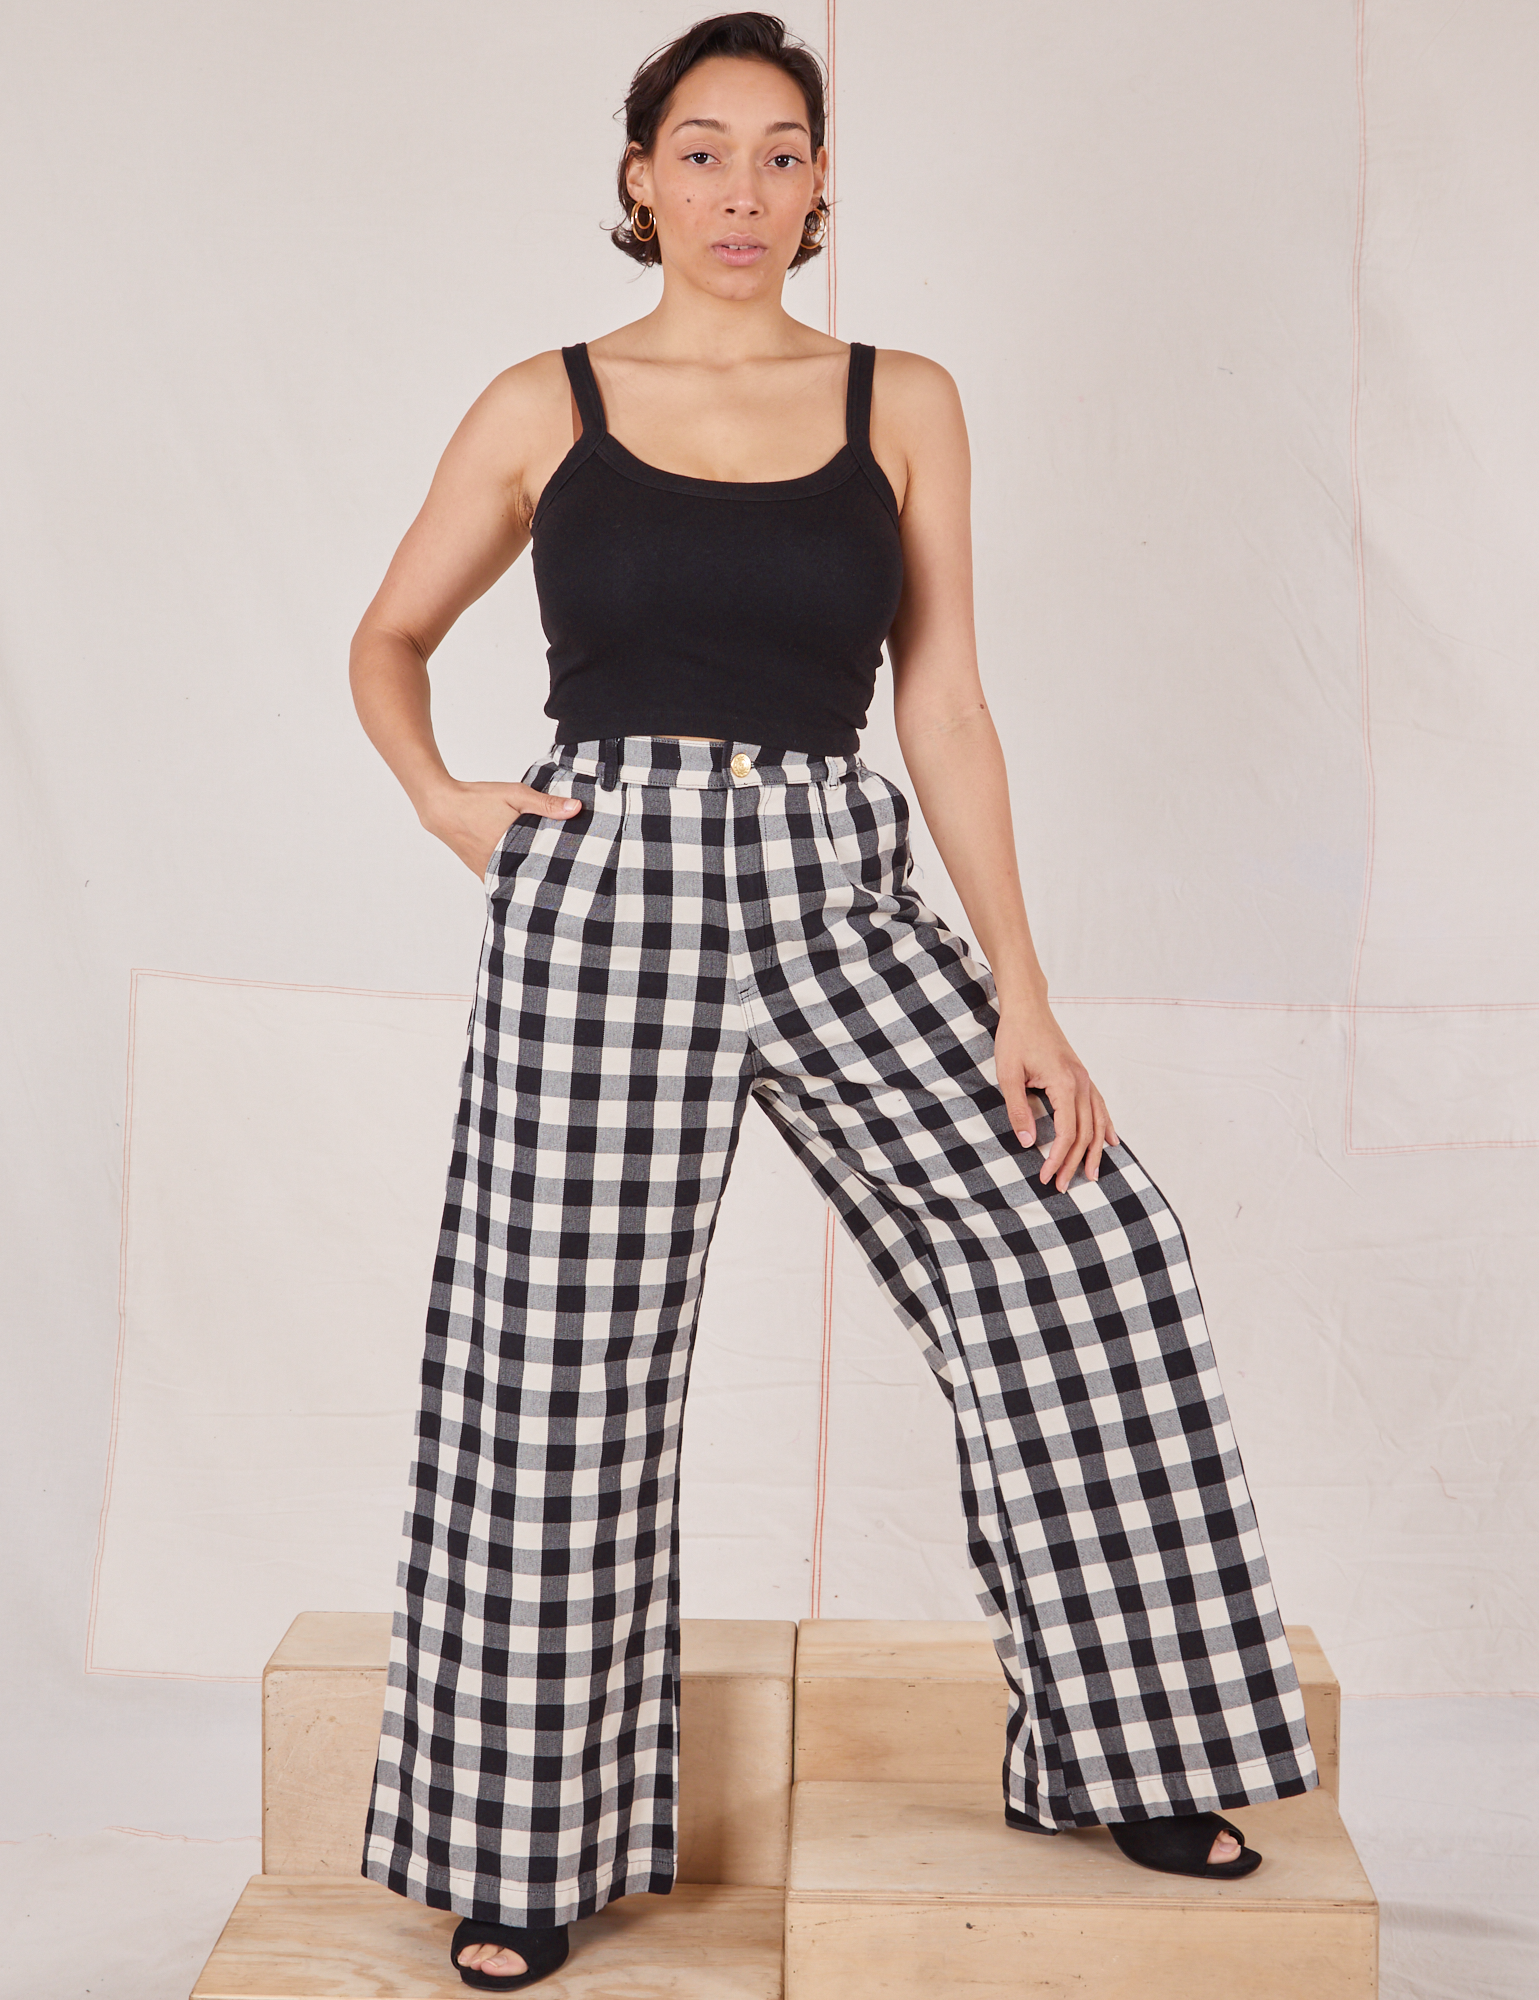 Tiara is 5&#39;4&quot; and wearing XS Wide Leg Trousers in Big Gingham paired with black Cropped Cami